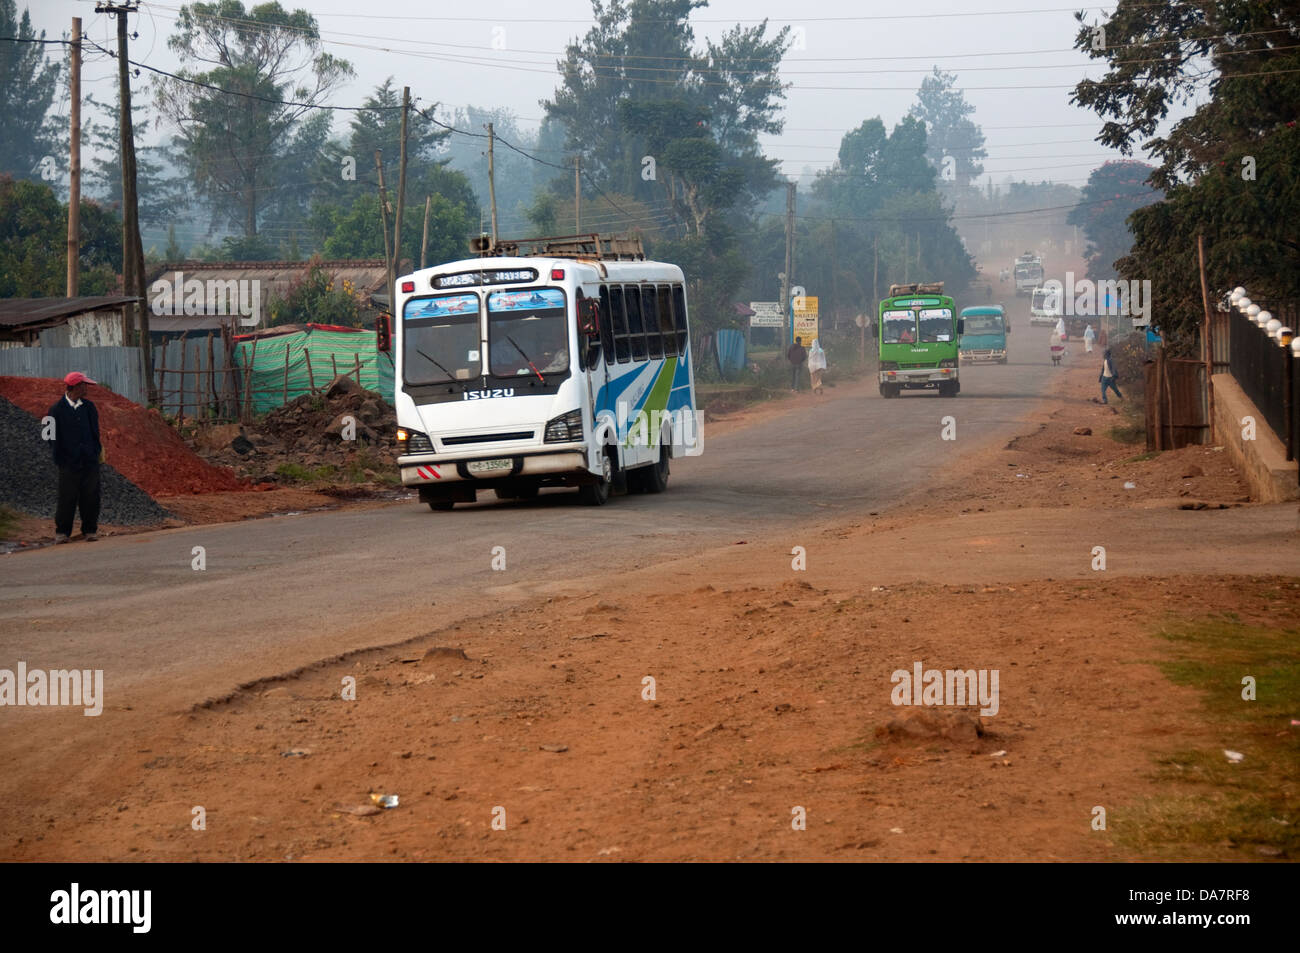 A man waiting for a bus on a dusty road, Jimma, Ethiopia Stock Photo